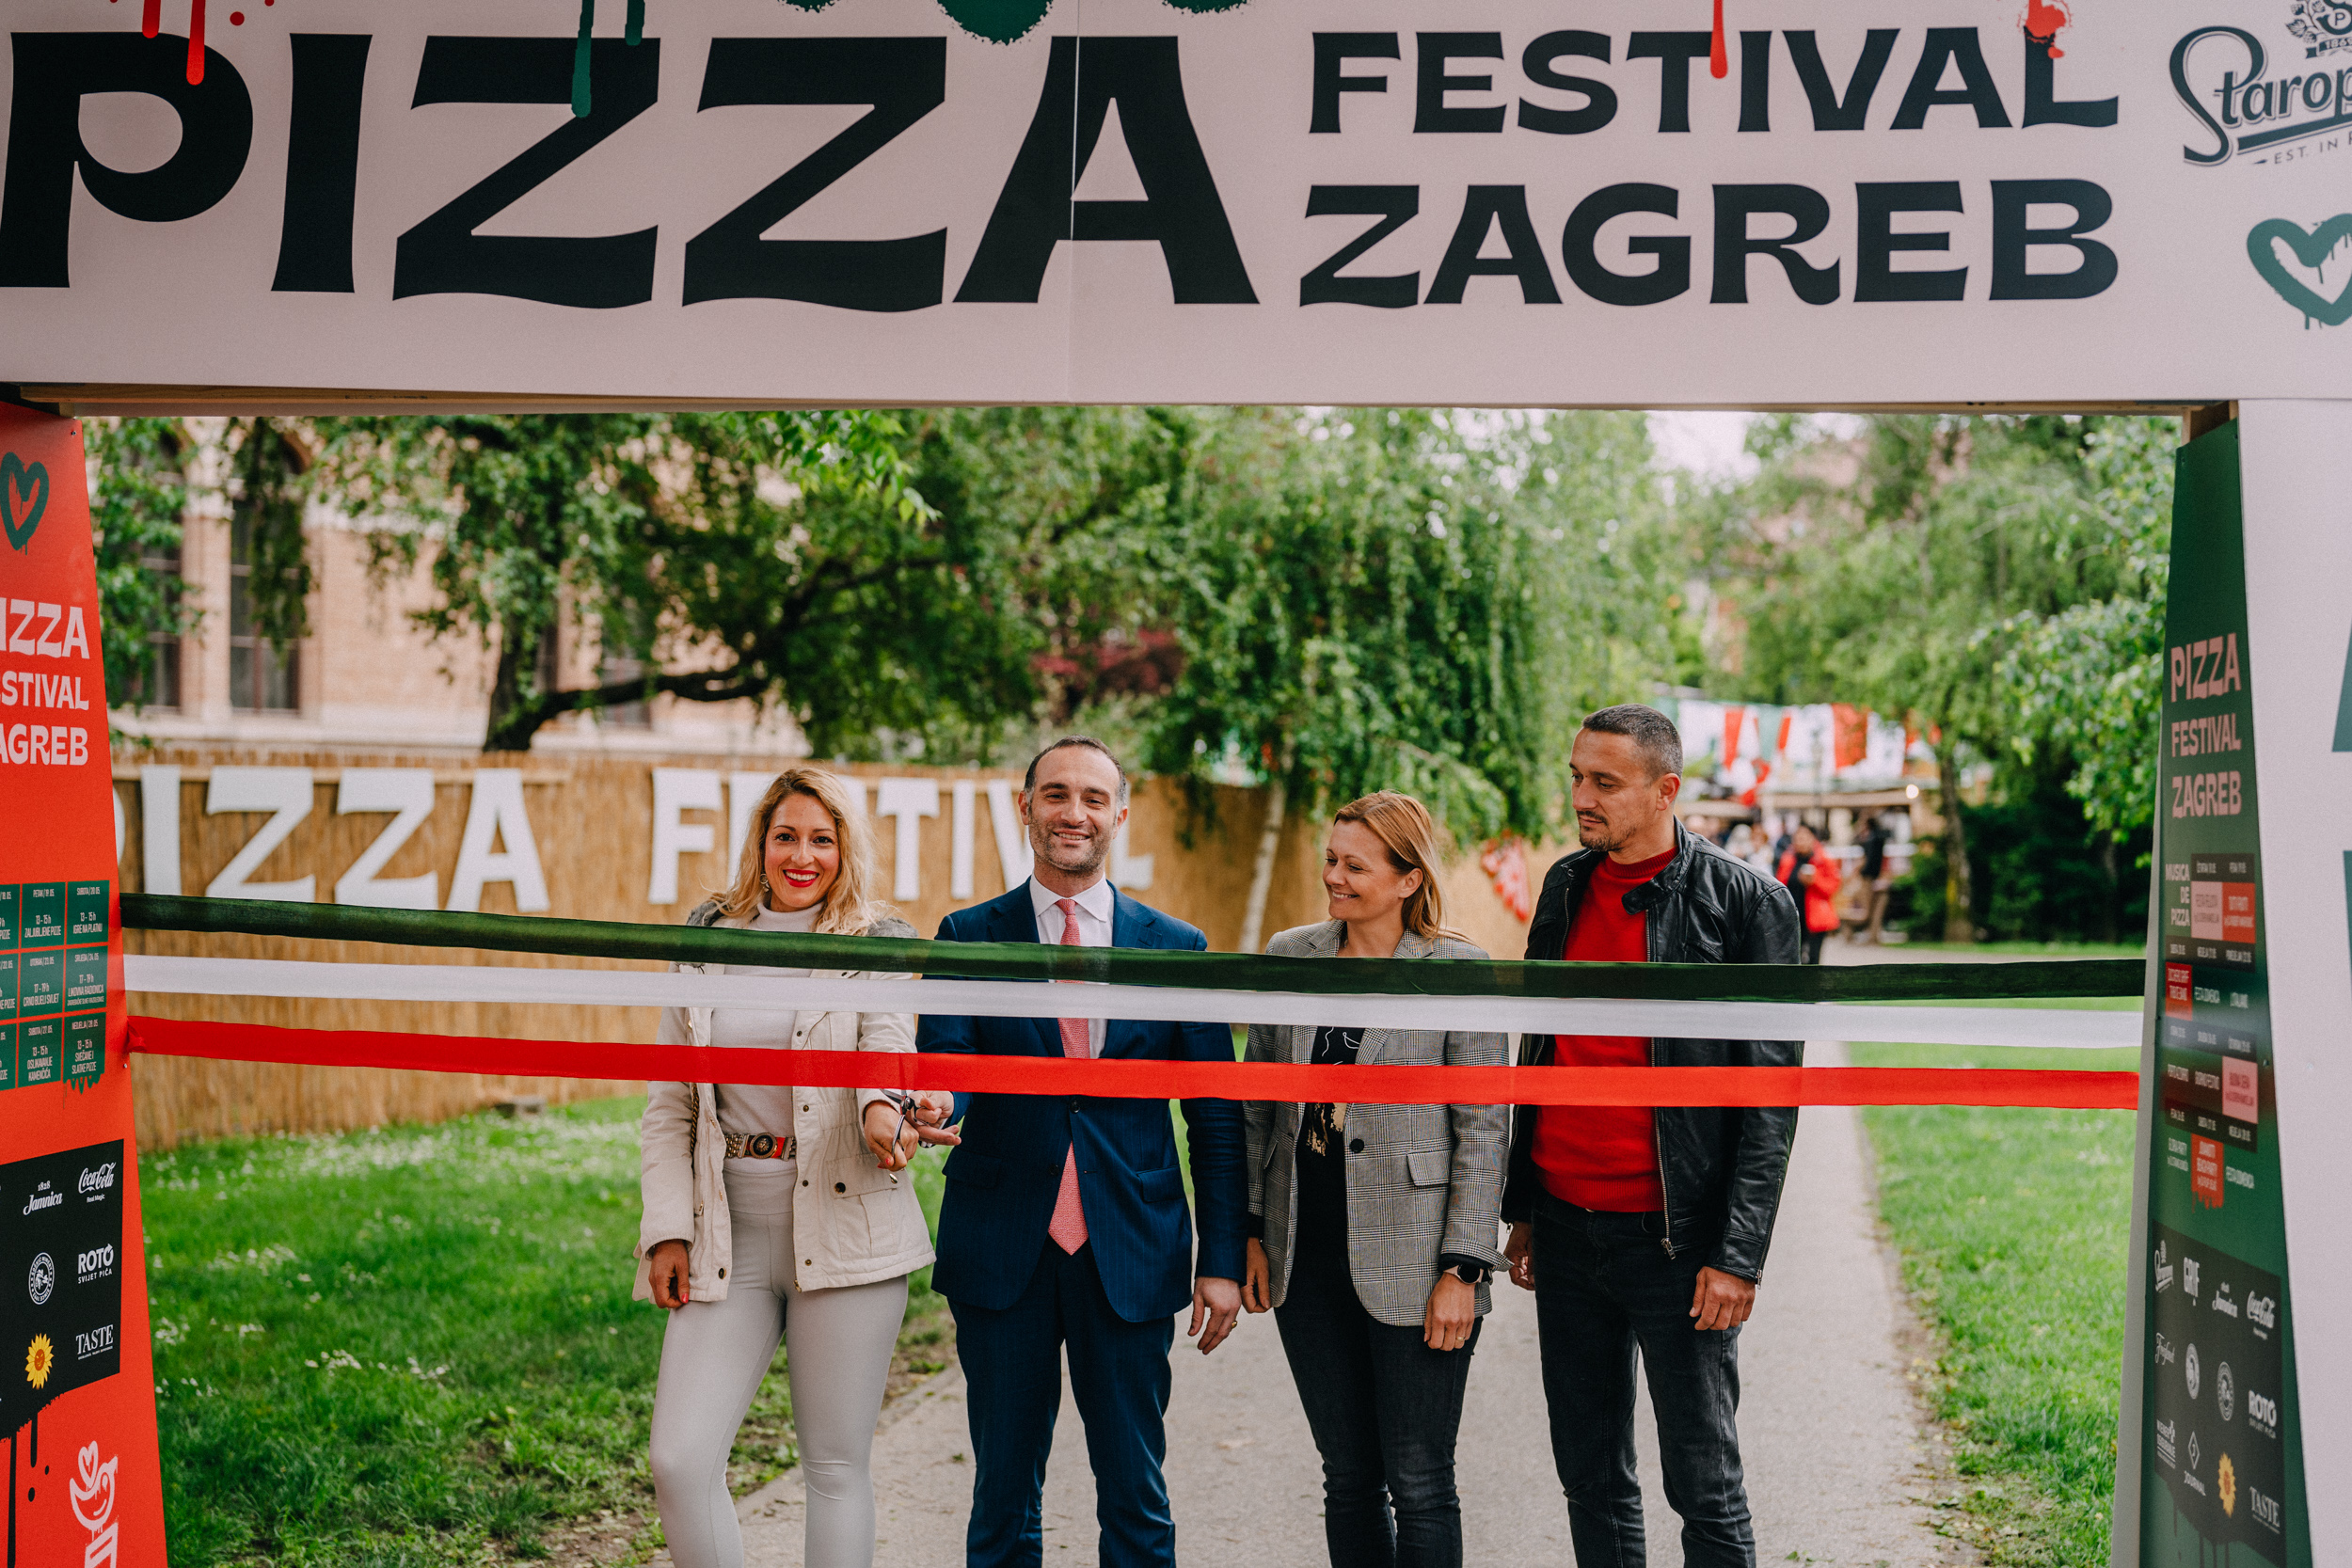 What are some title ideas for a report about Zagreb Pizza Festival and all the things people can taste there 